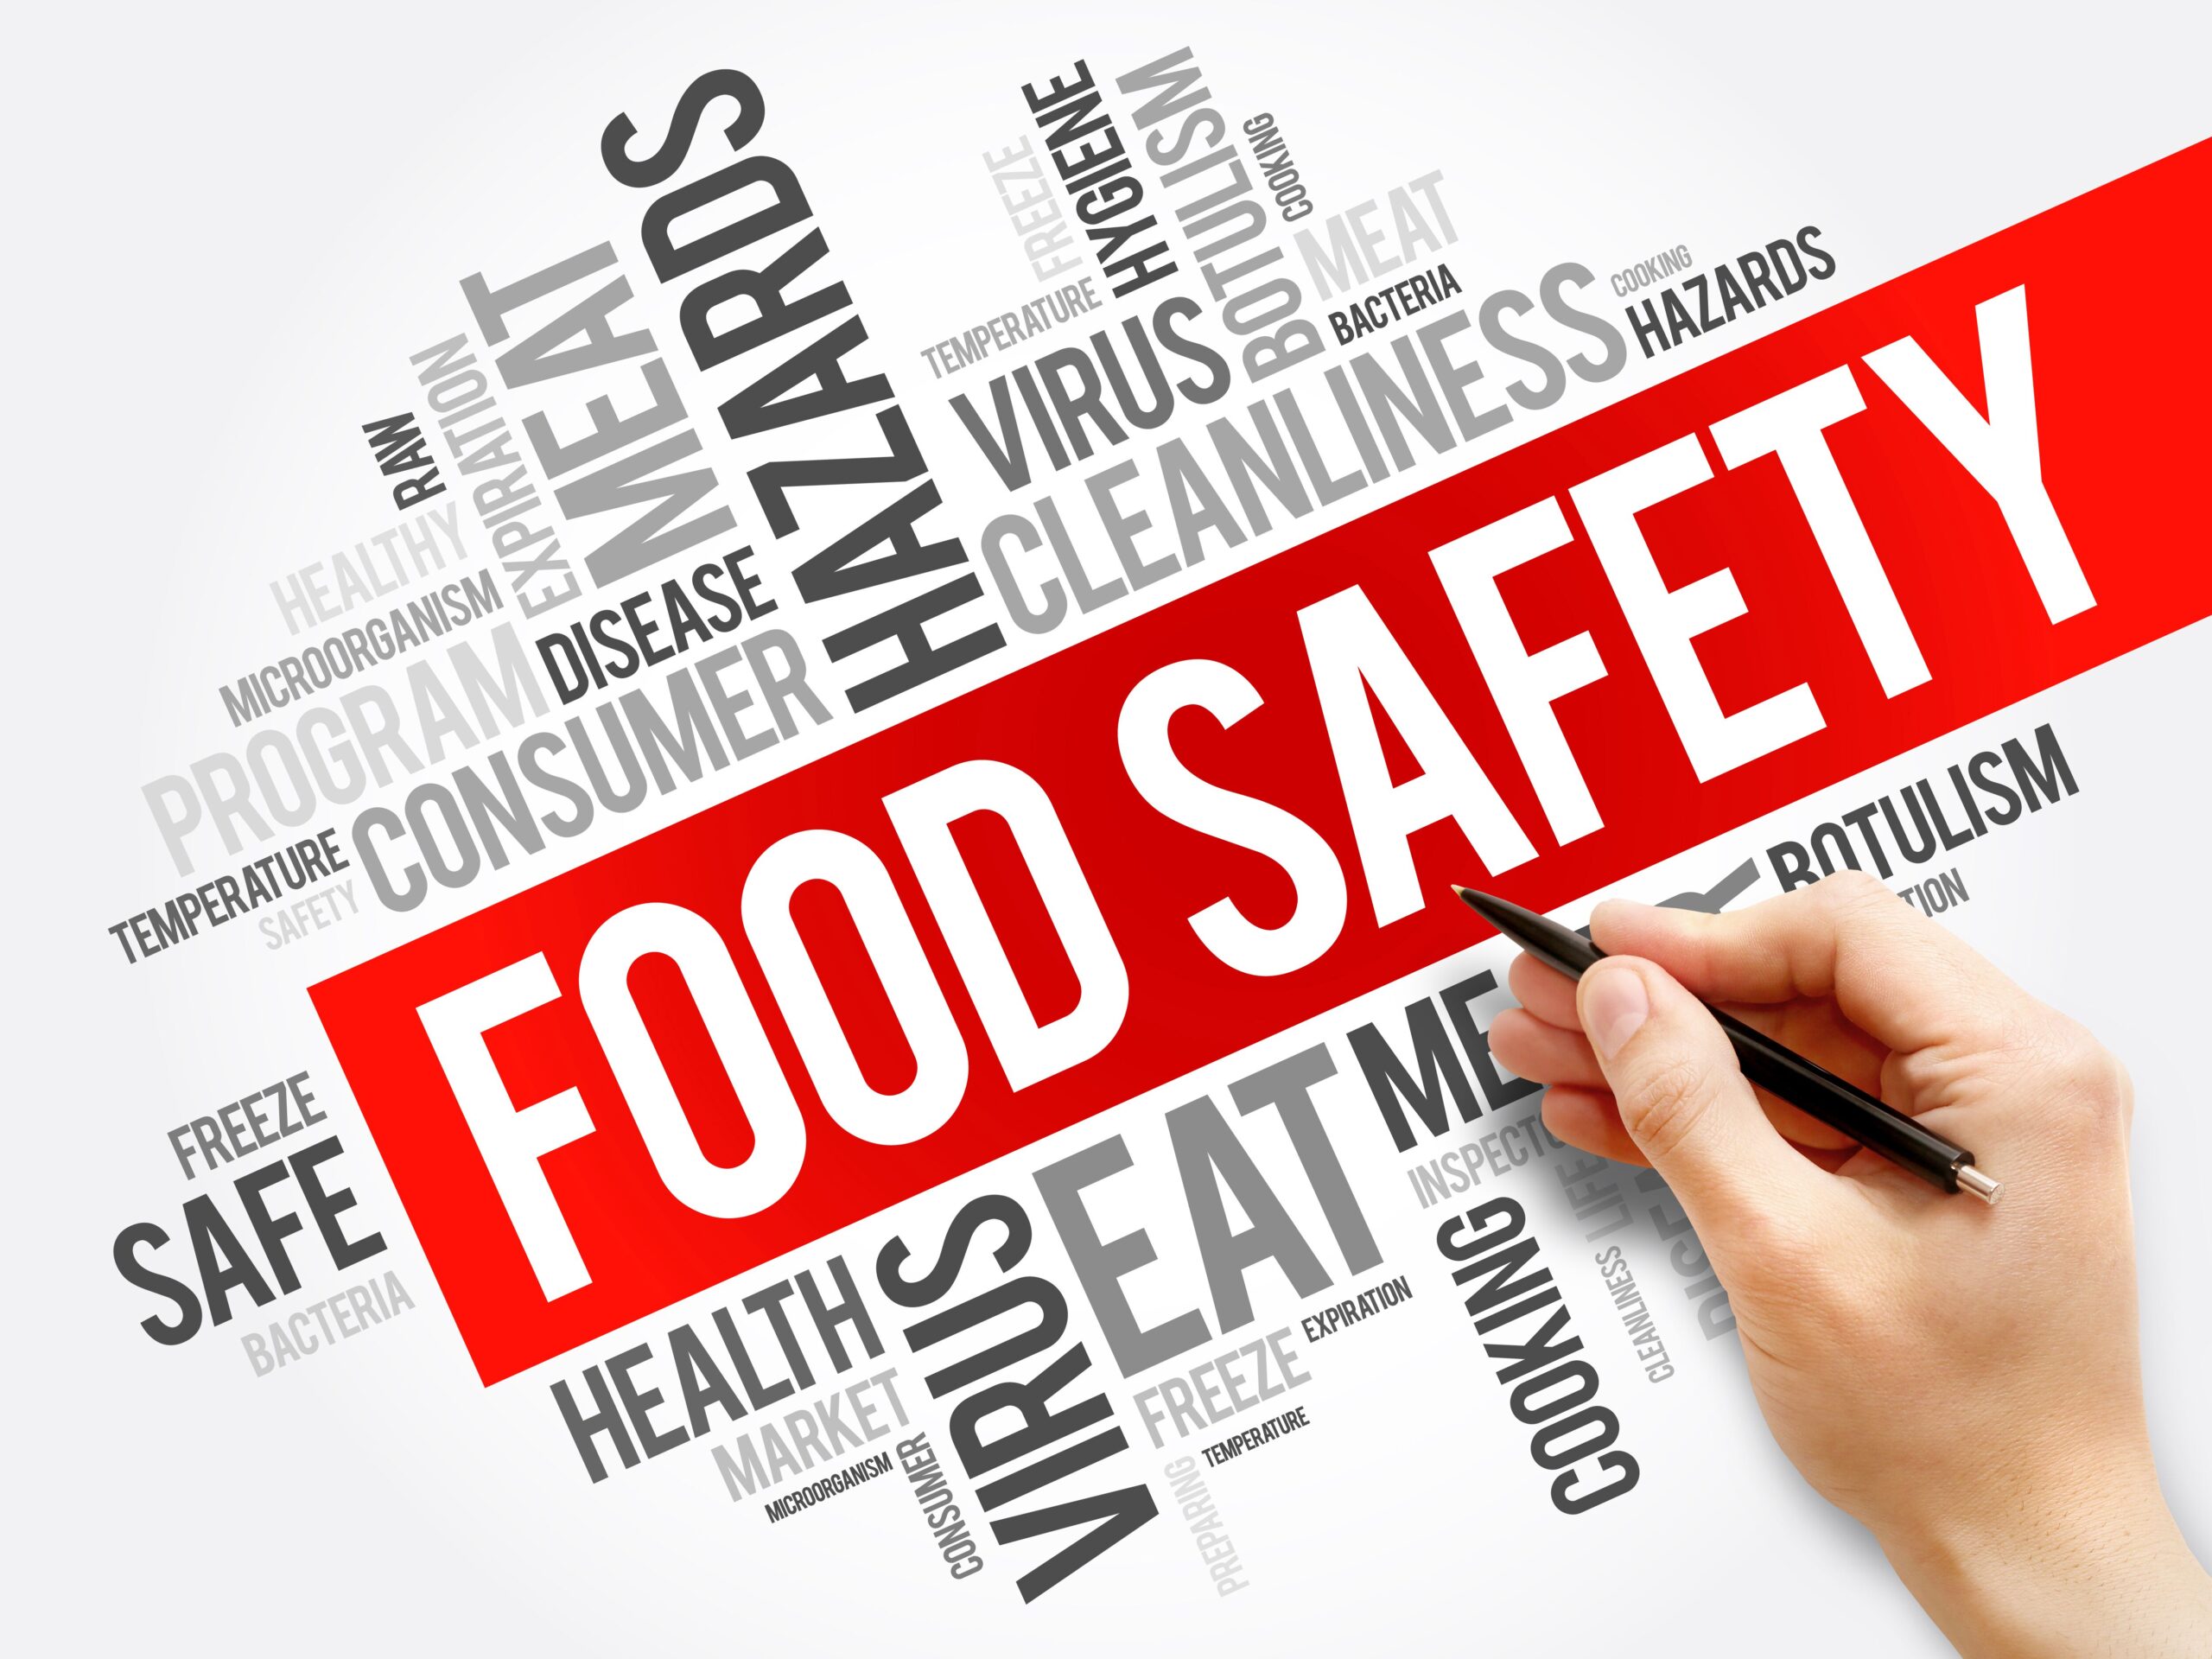 FOOD SAFETY RESOURCES EVERY RESTAURANT OWNER NEEDS